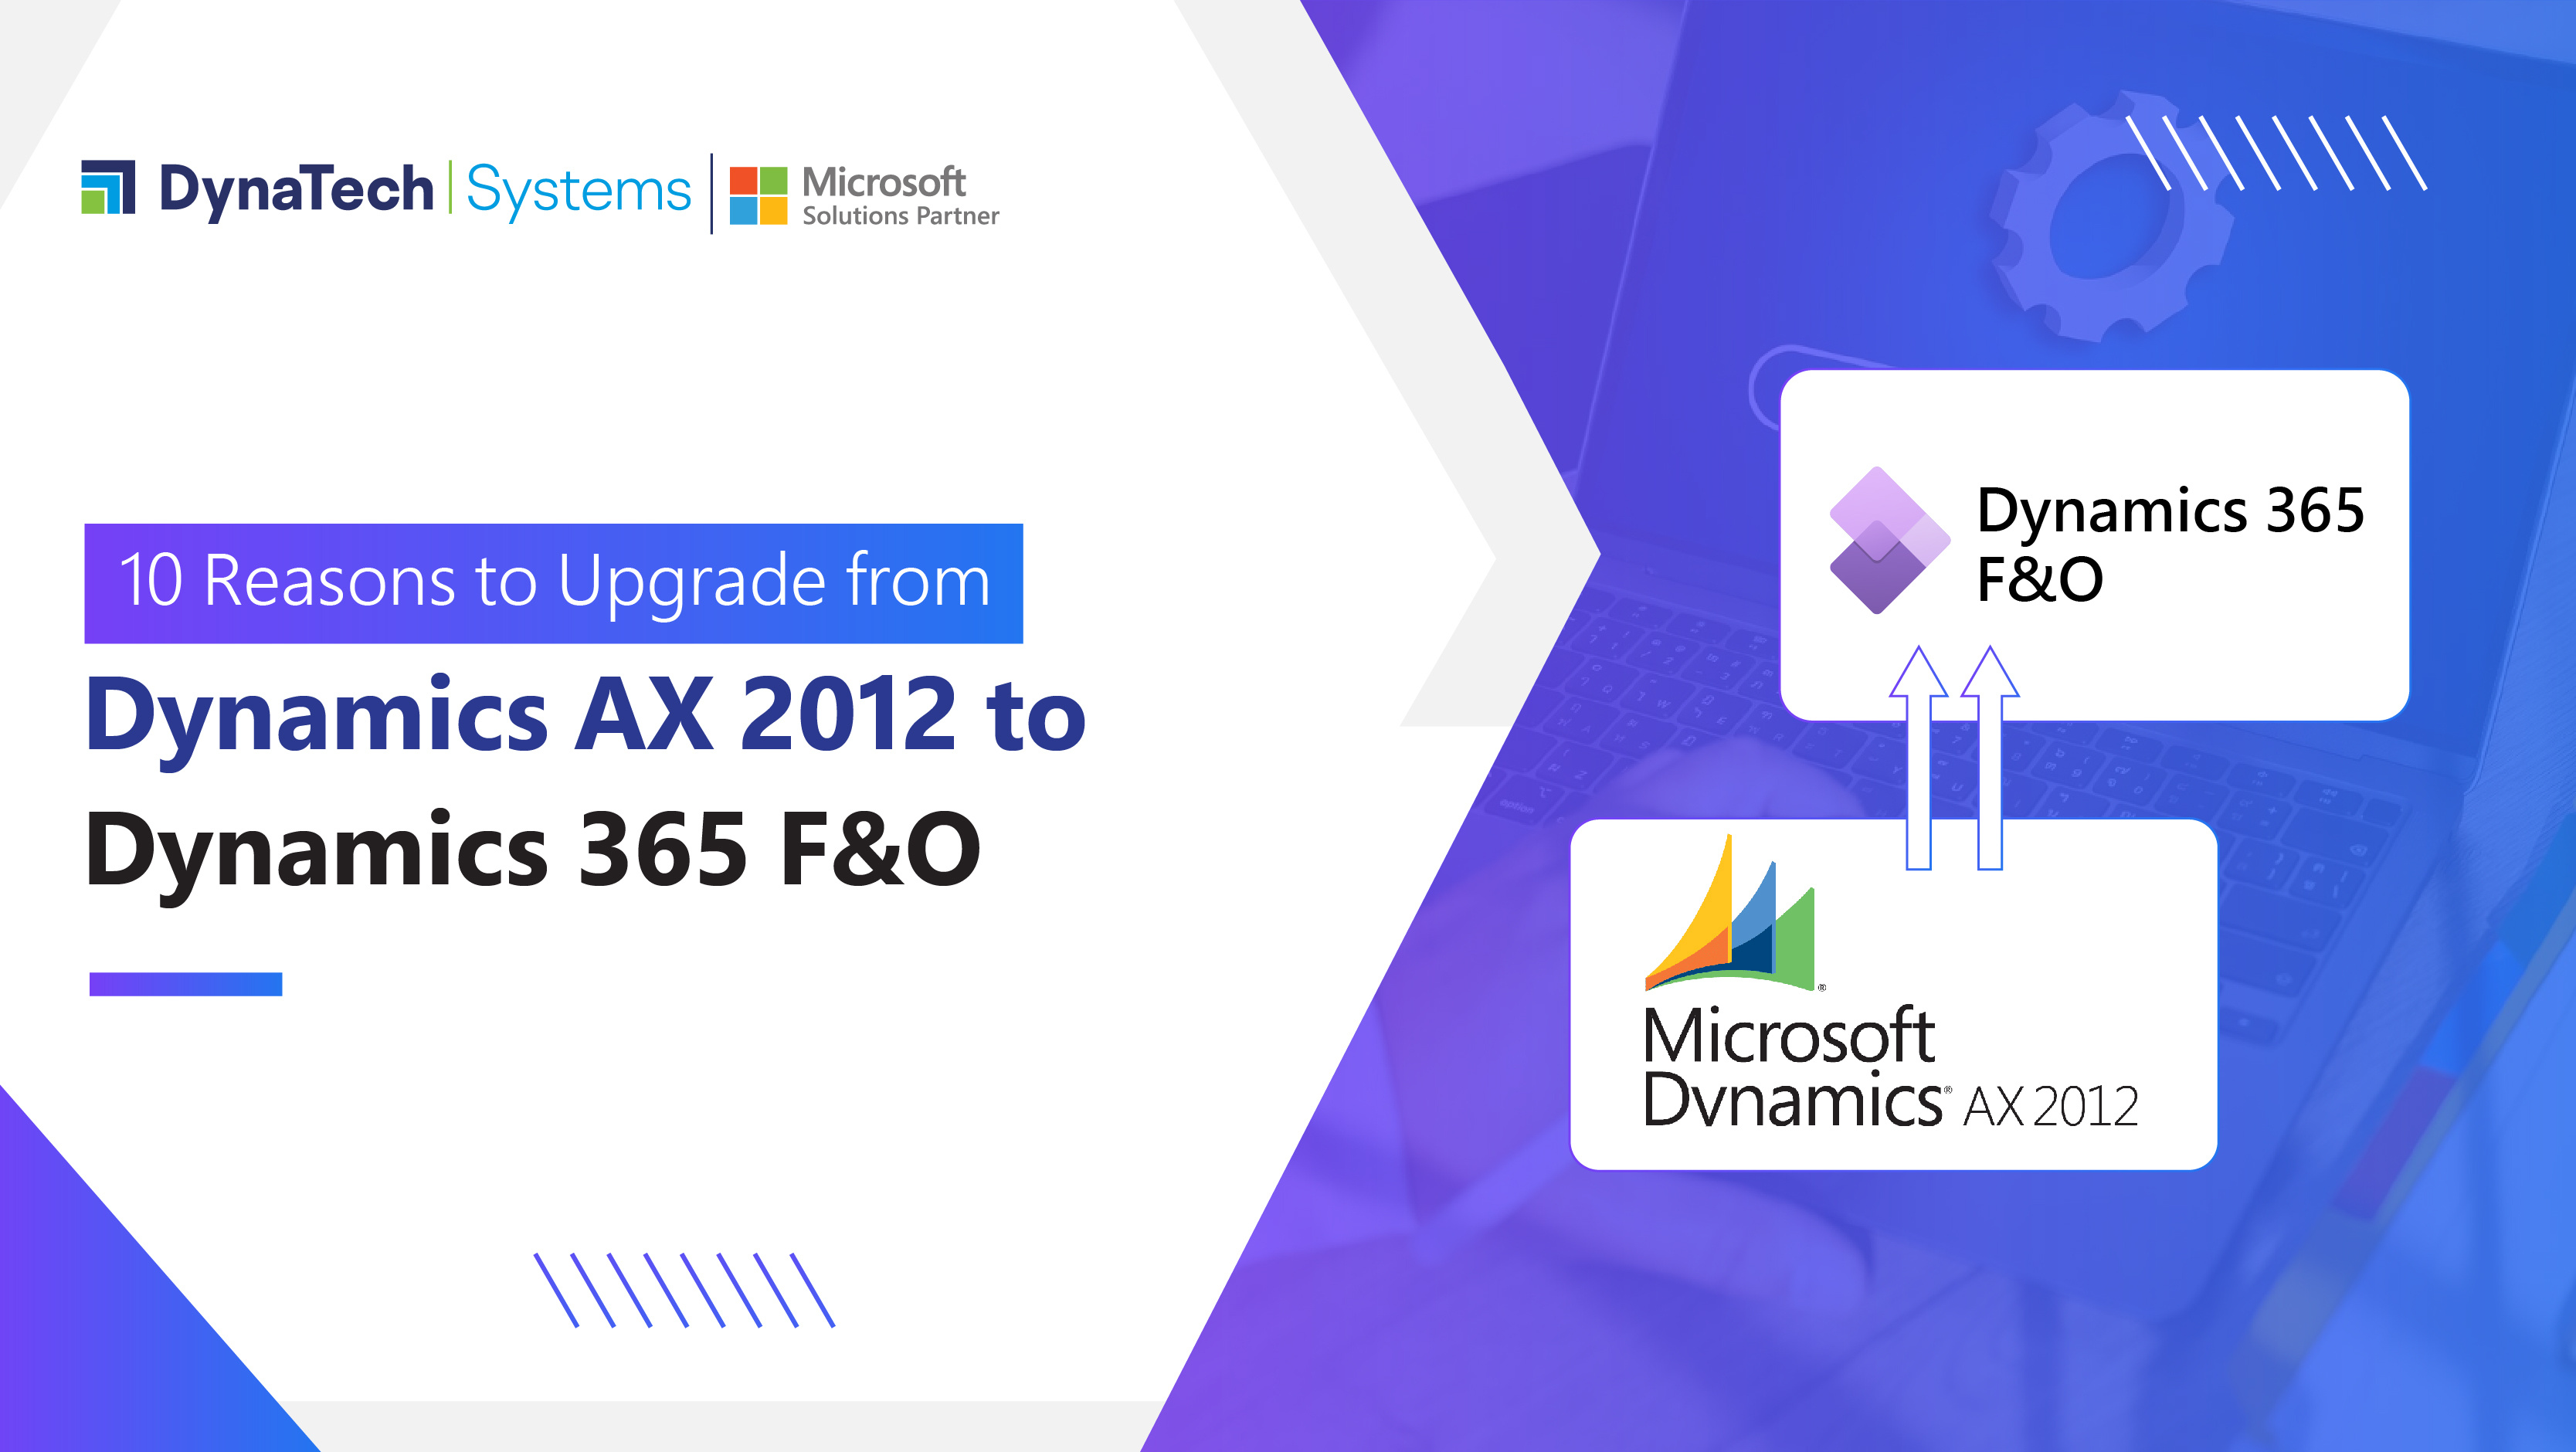 10 Benefits of Upgrading from Dynamics AX 2012 to Dynamics 365 F&O